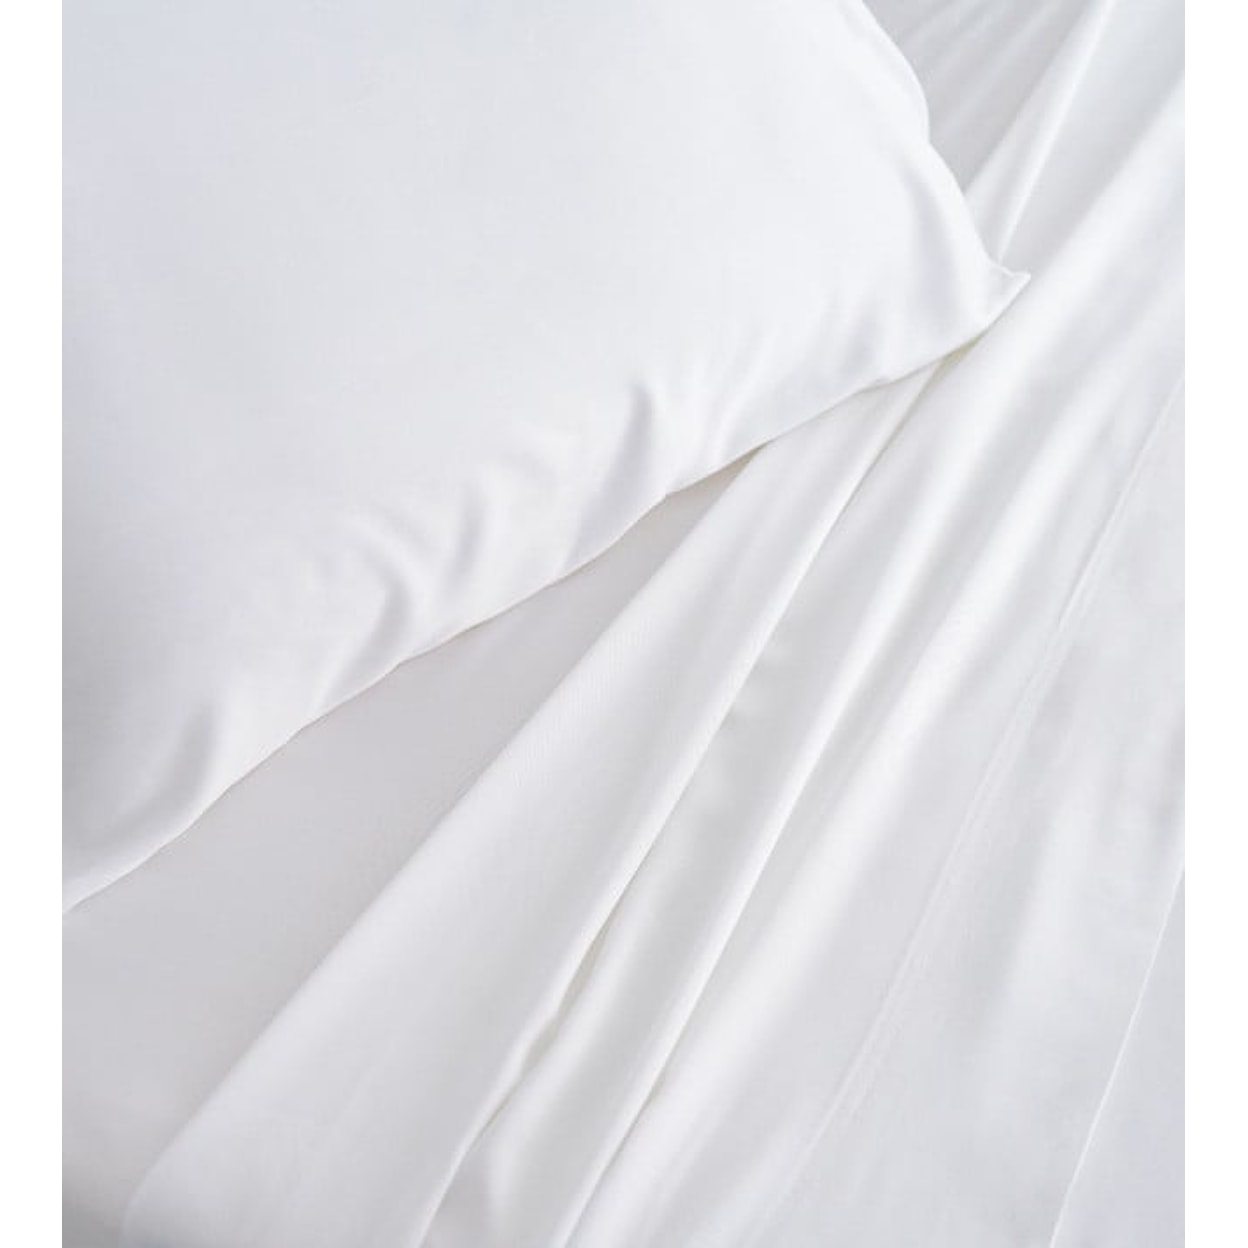 Cariloha Classic Bamboo Bed Sheet Set Queen Classic Bamboo Sheet Set in White